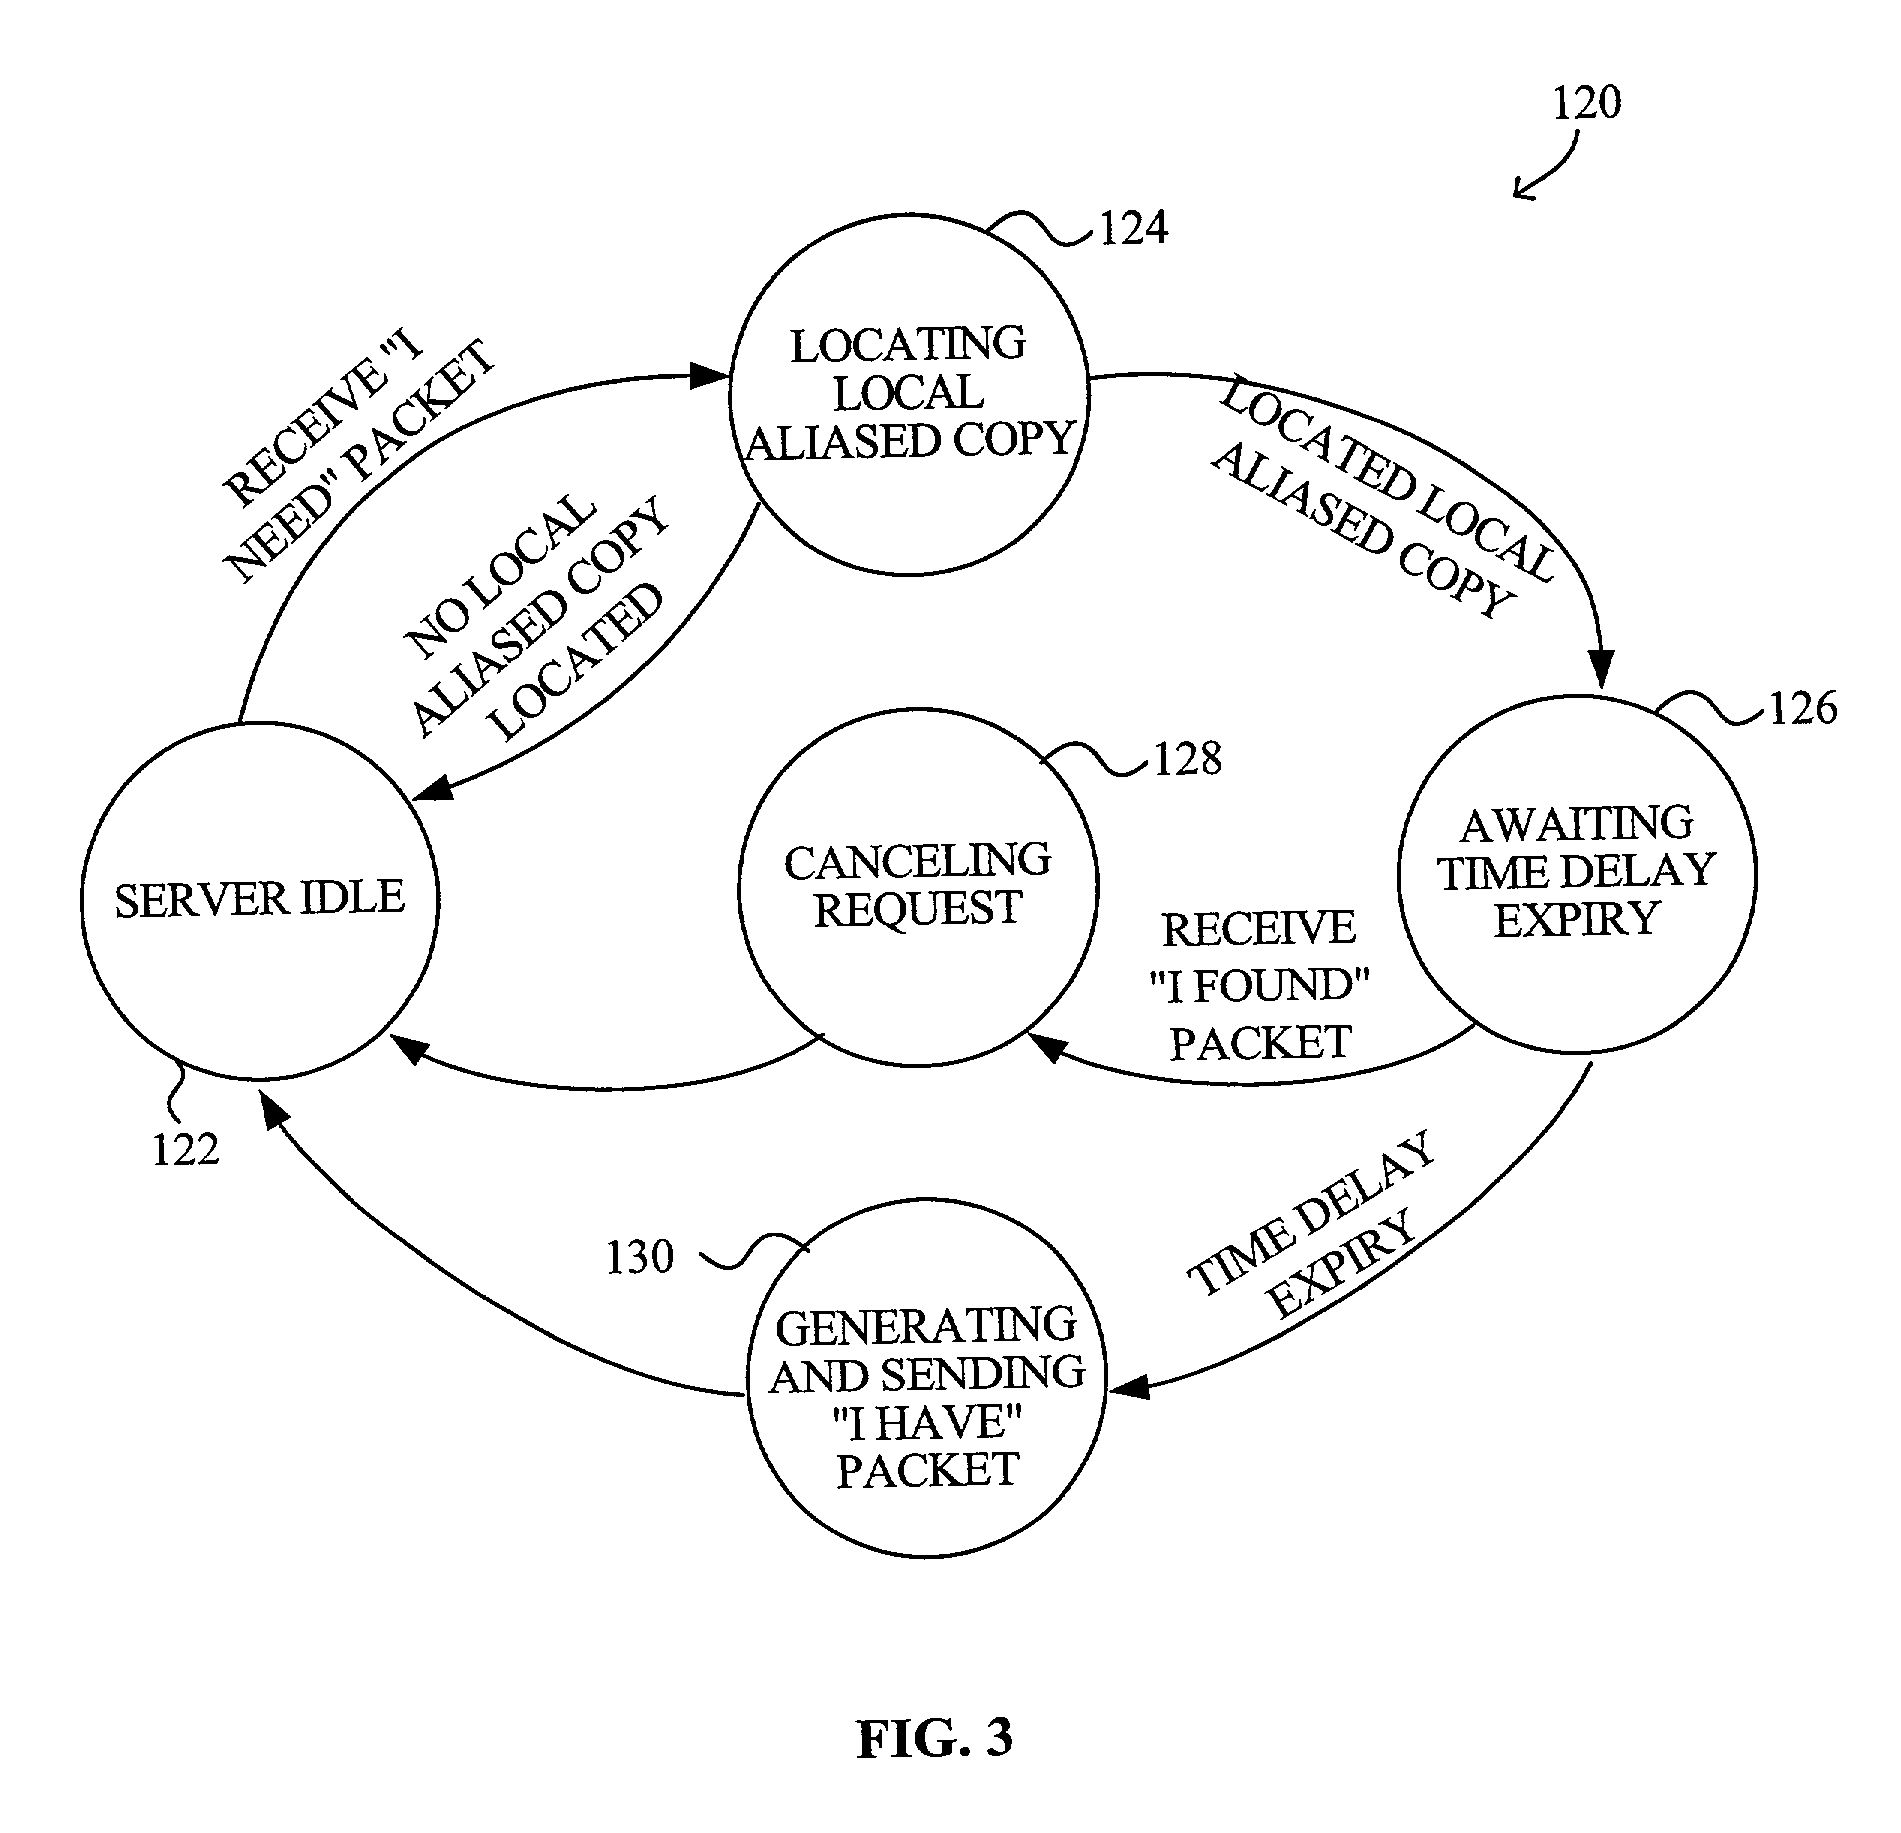 System and method to verify trusted status of peer in a peer-to-peer network environment